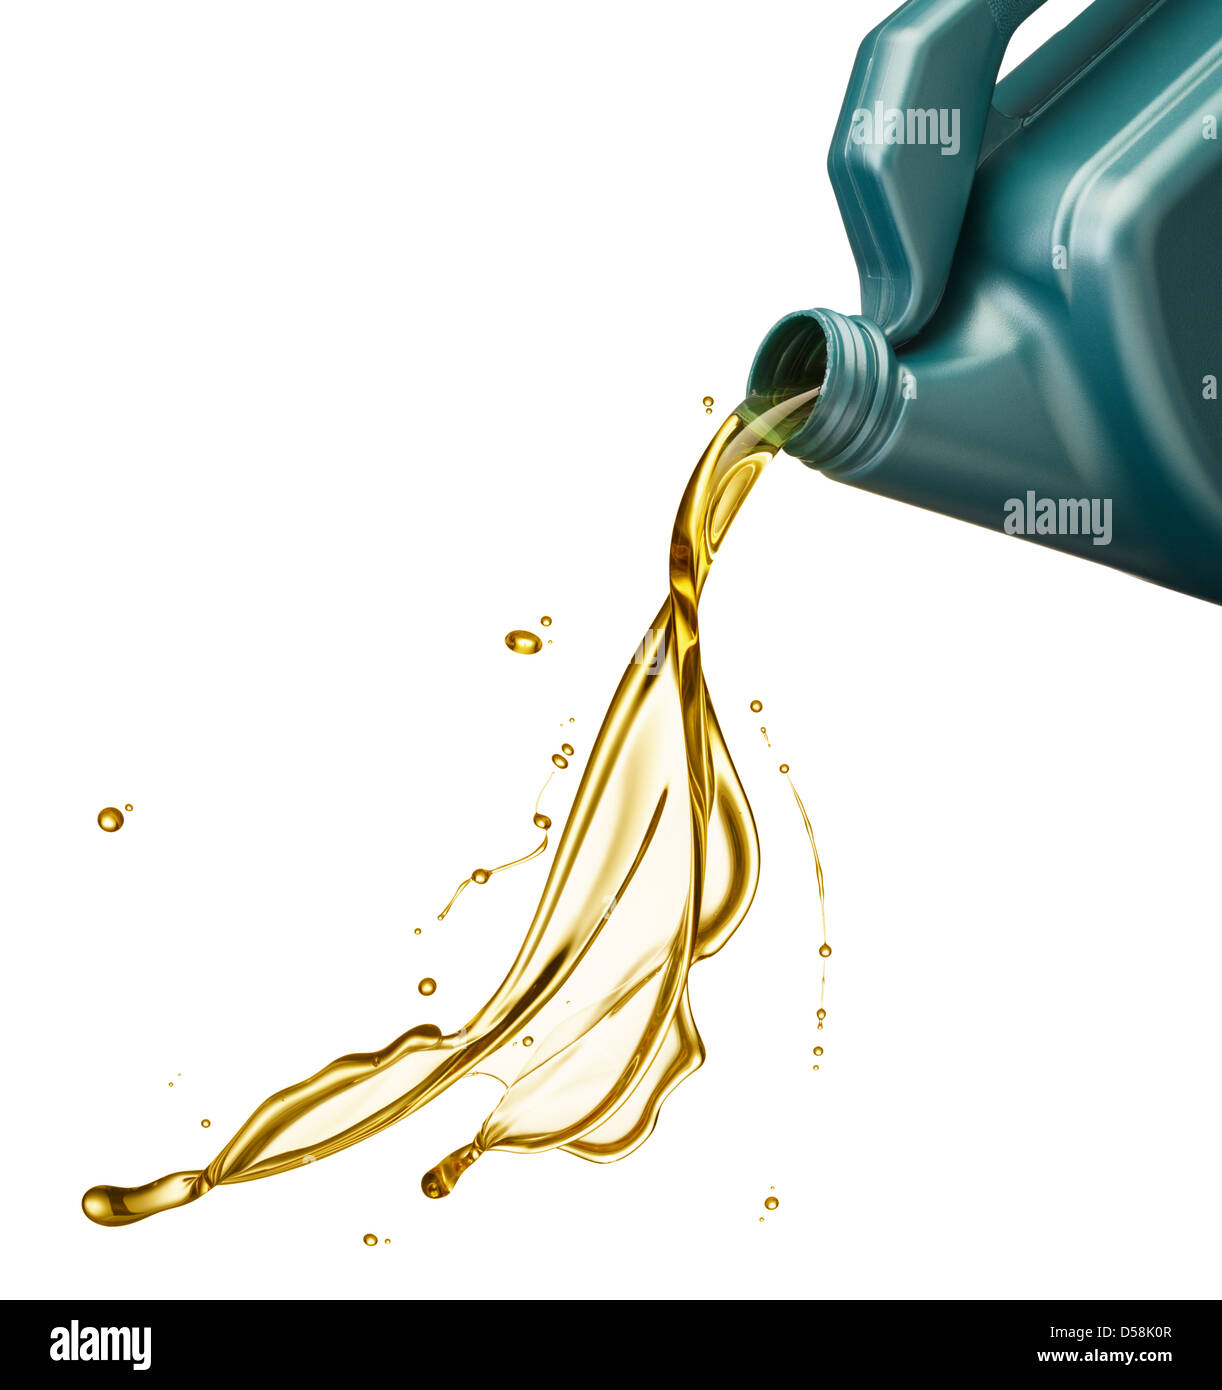 pouring engine oil from its plastic container Stock Photo